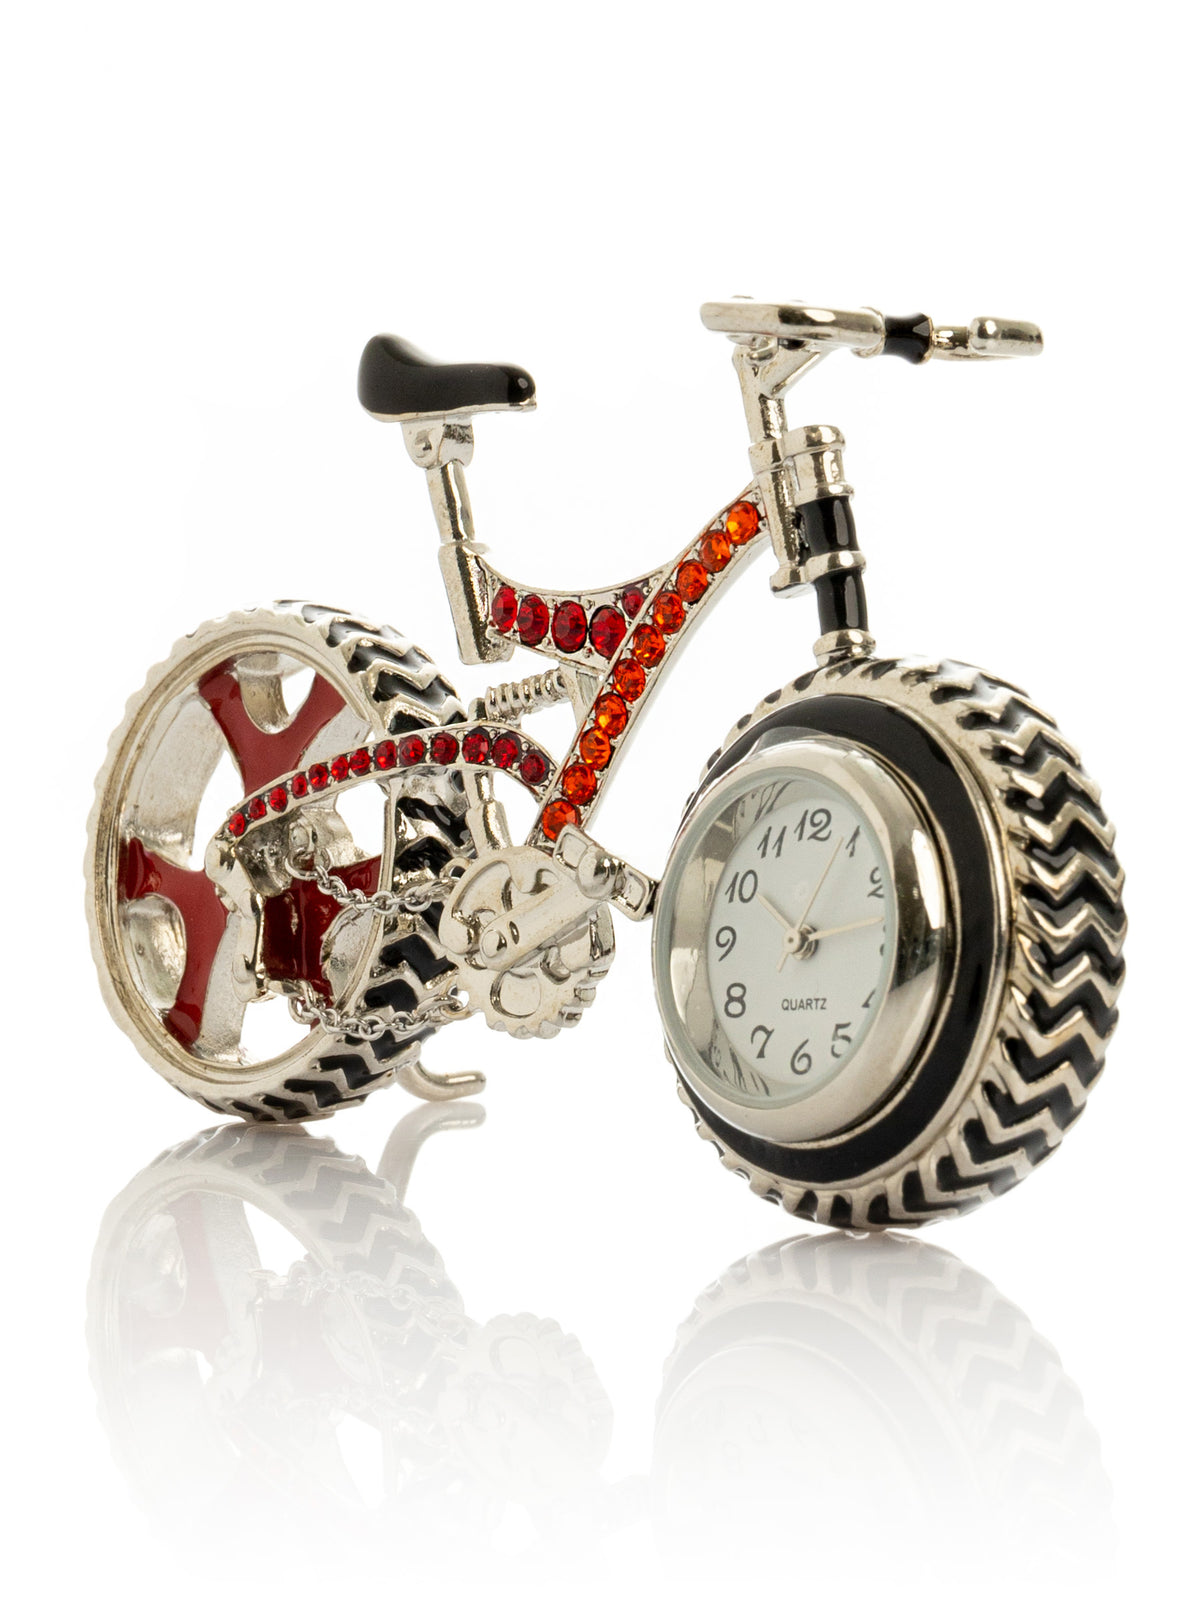 Bicycle clock with Red crystals